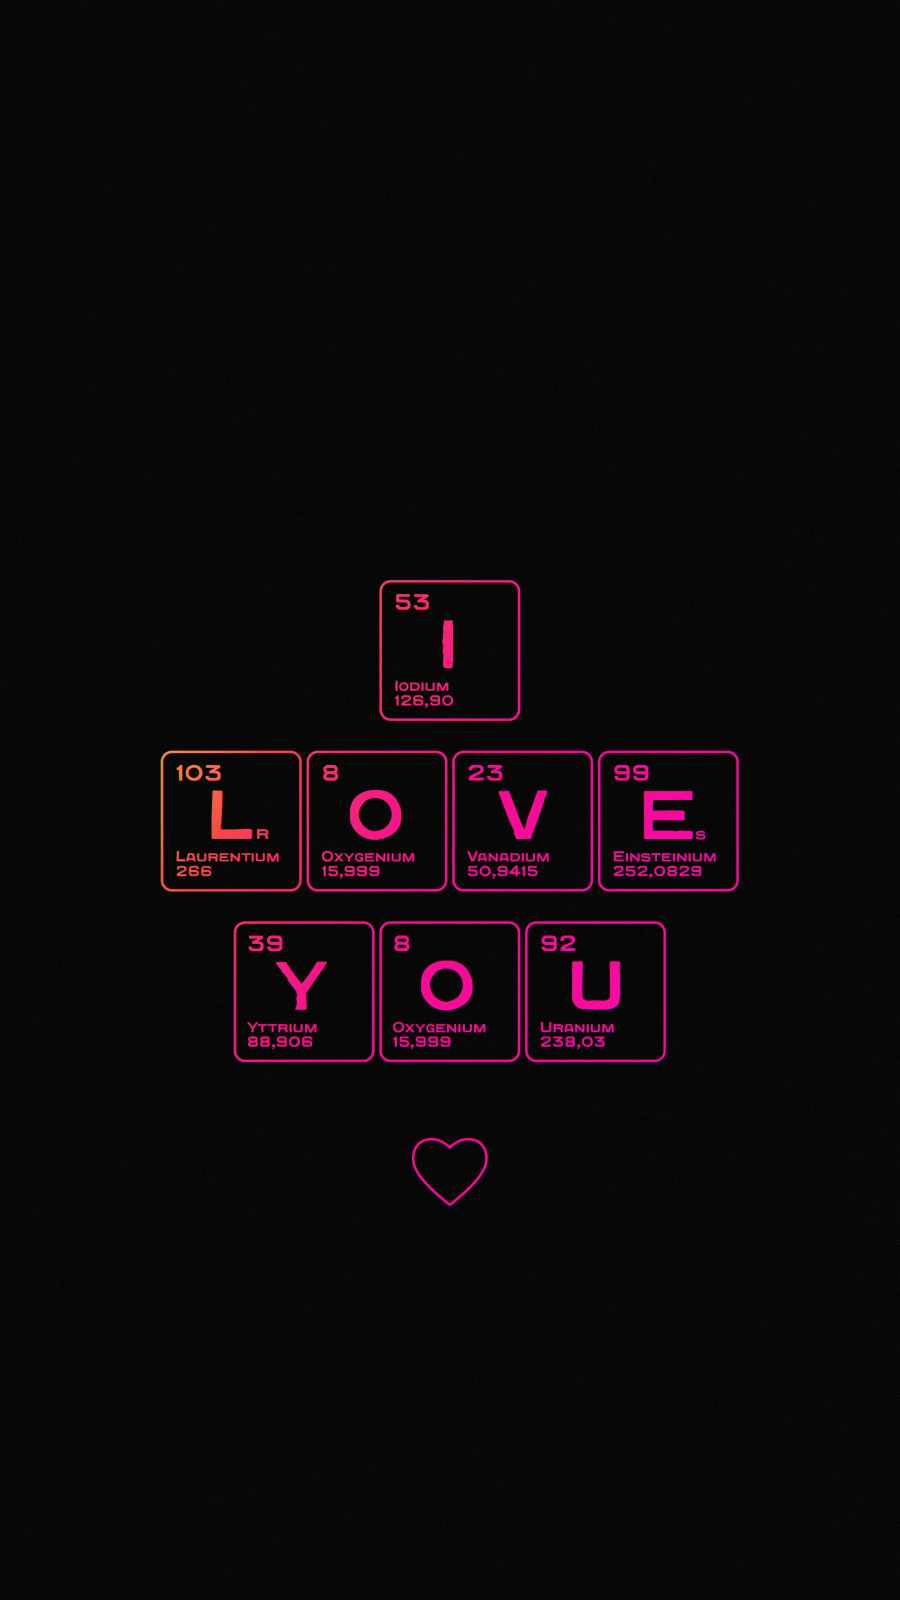 I Love You DP Images HD for Mobile iPhone Wallpapers  Wallpaper DP  Love  wallpapers romantic Love wallpaper Love feeling images